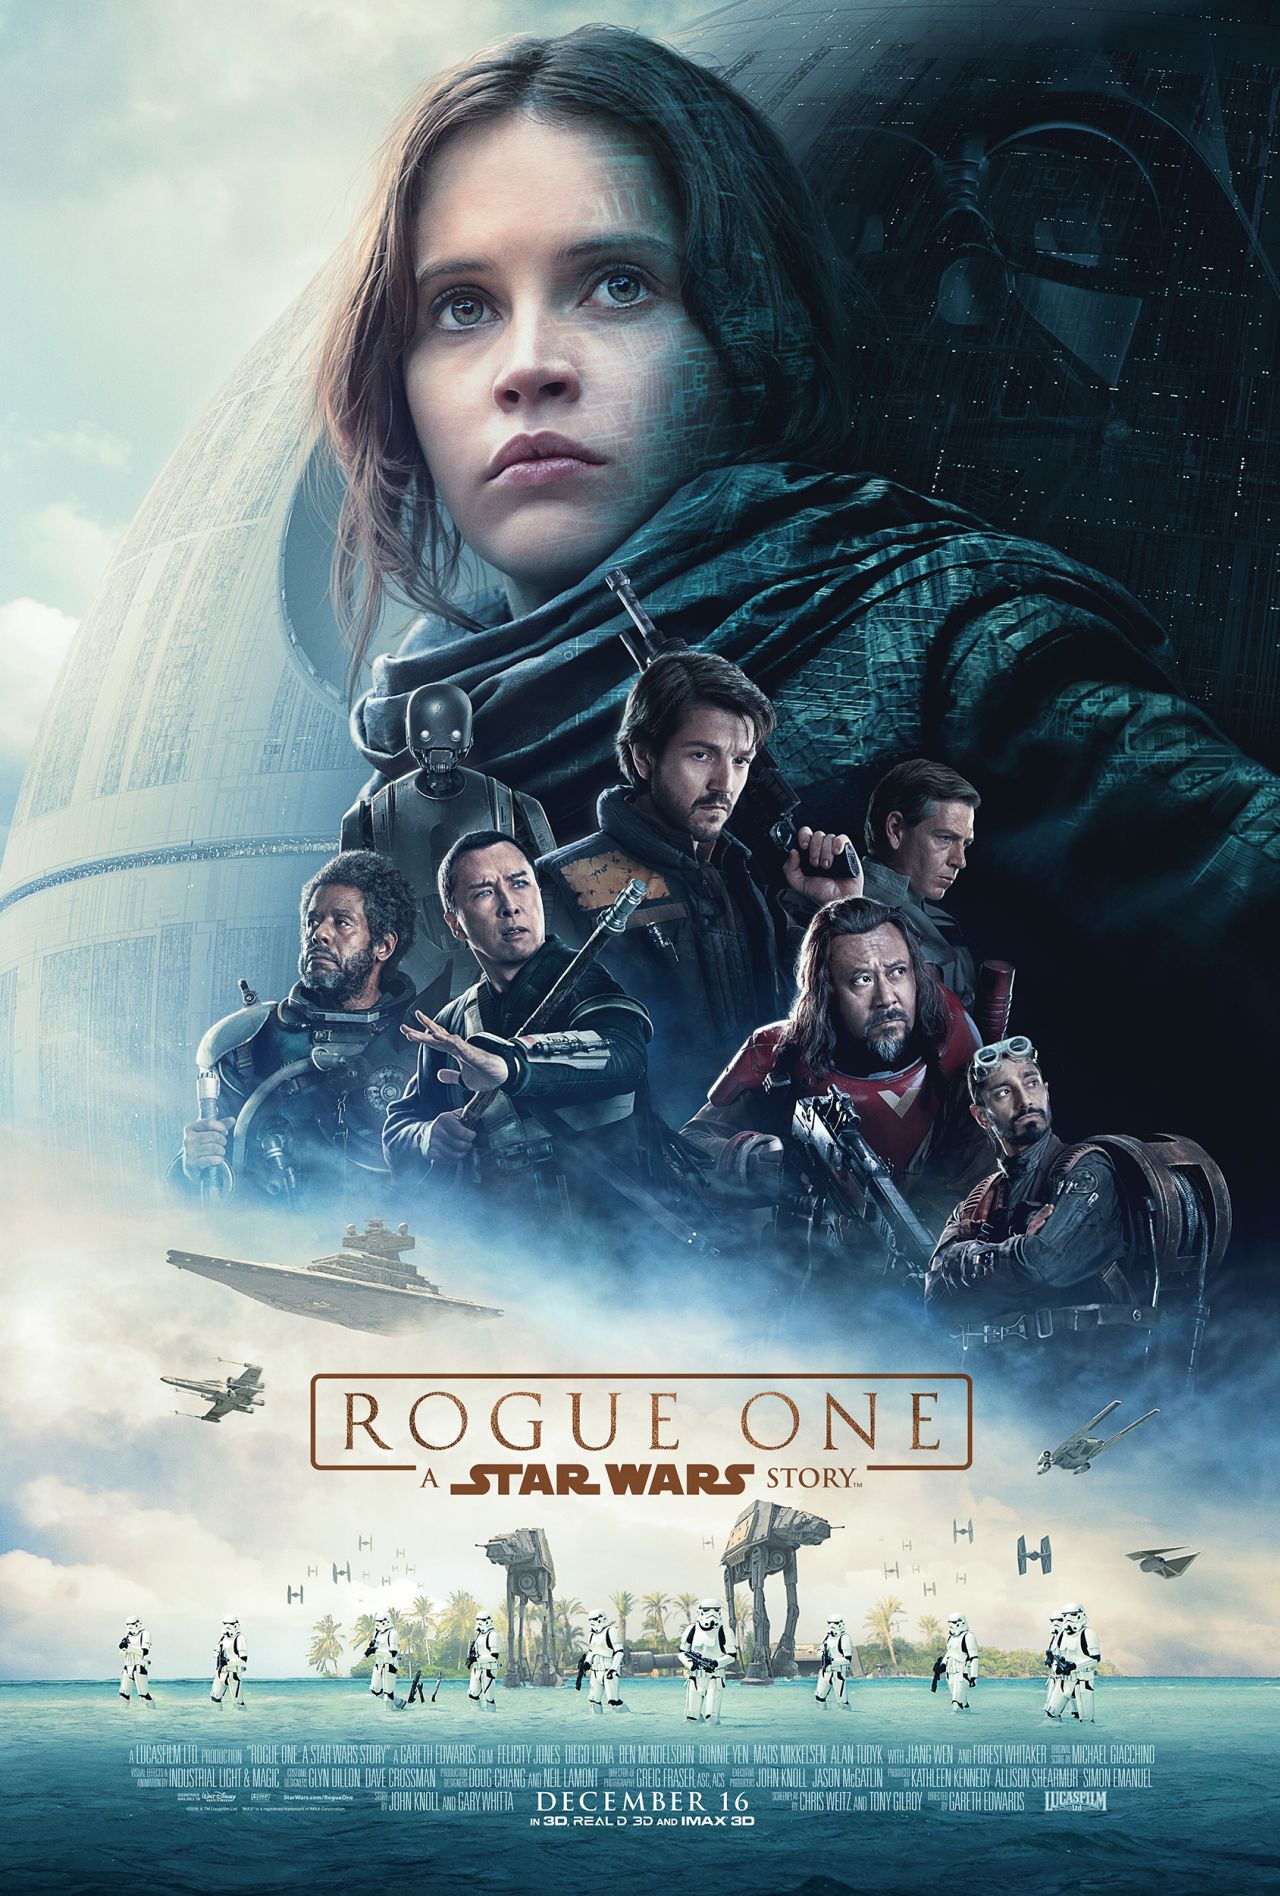 'Rogue One: A Star Wars Story' (credit: Disney•Lucasfilm)